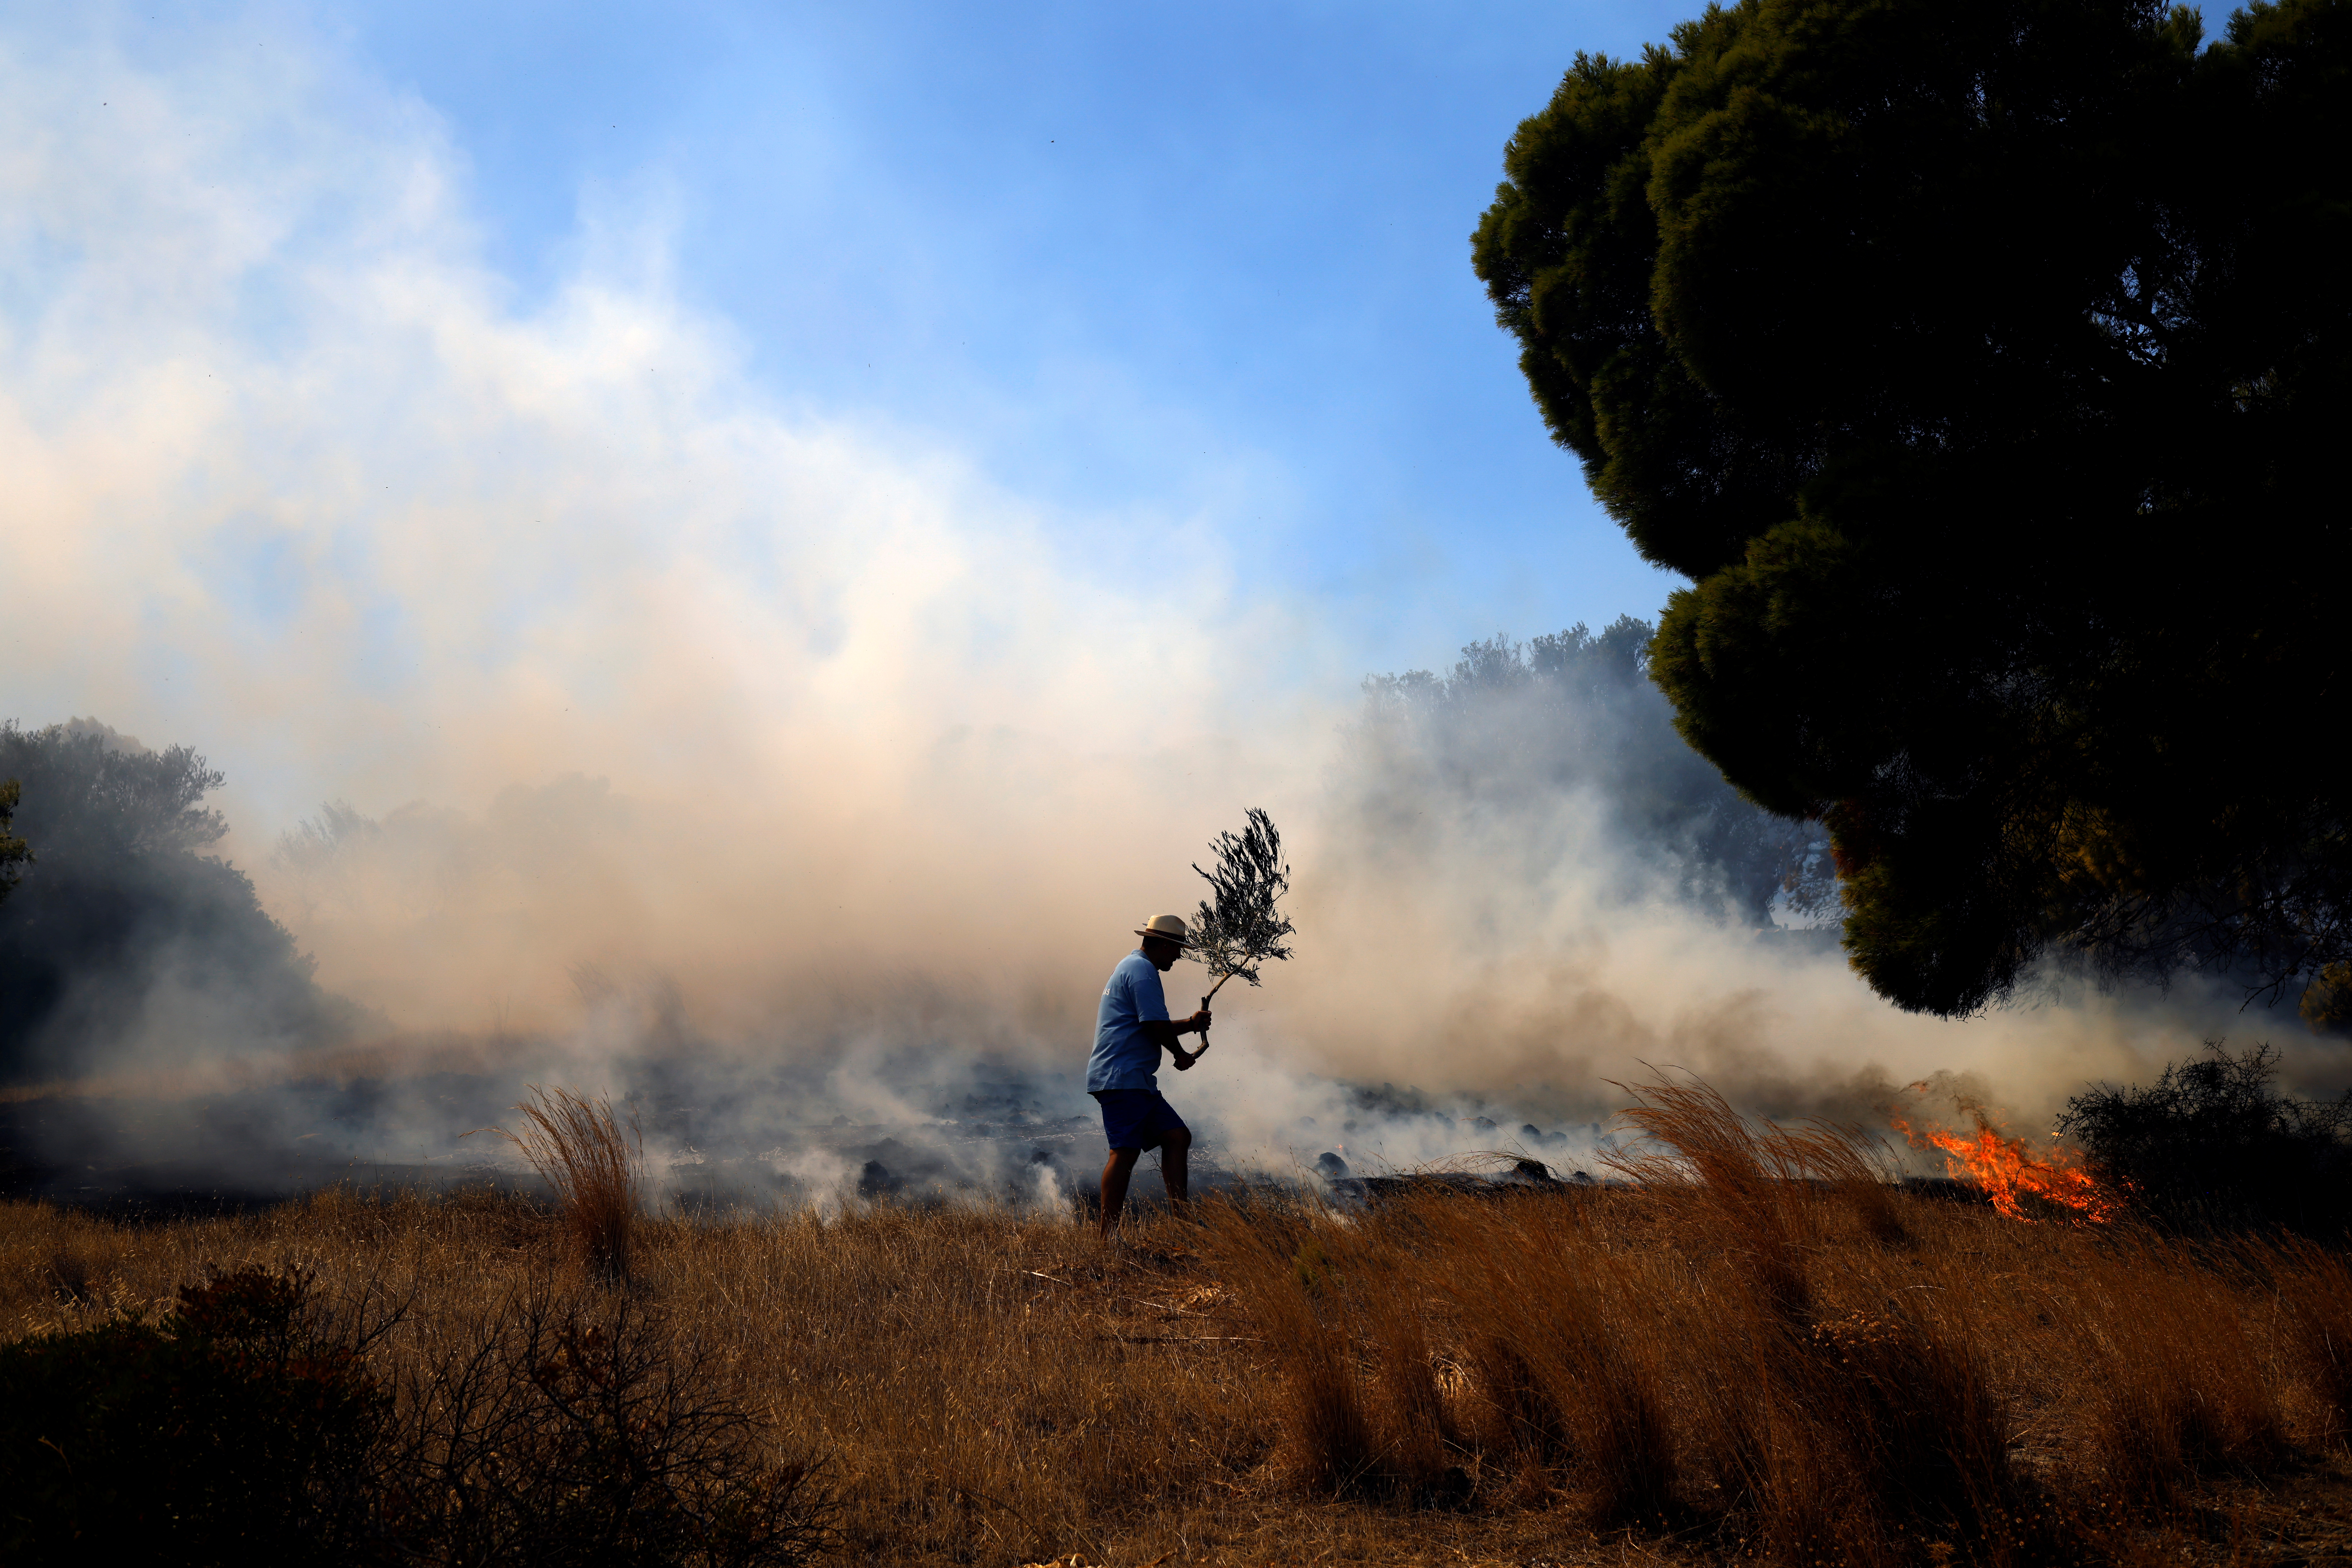 A local tries to extinguish a wildfire burning in the village of Markati, near Athens, Greece, August 16, 2021. REUTERS/Alkis Konstantinidis